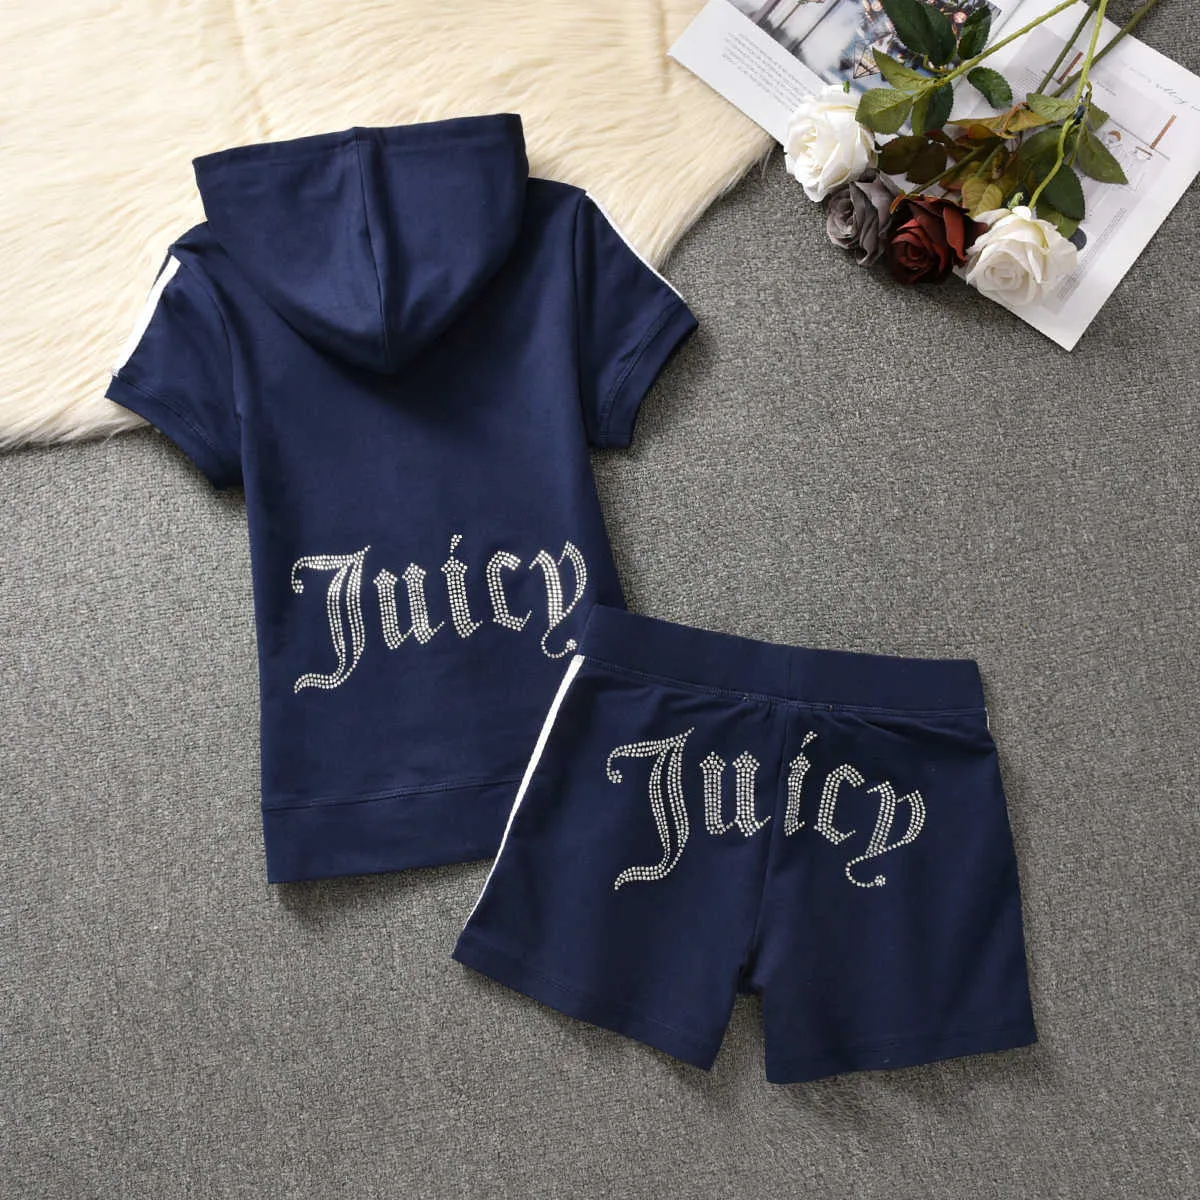 Juicy Apple Tracksuit Women's Leisure Sports two piece set women designer Summer Loose Short Sleeve Letter T-Shirt and Shorts Sports Set Outfits